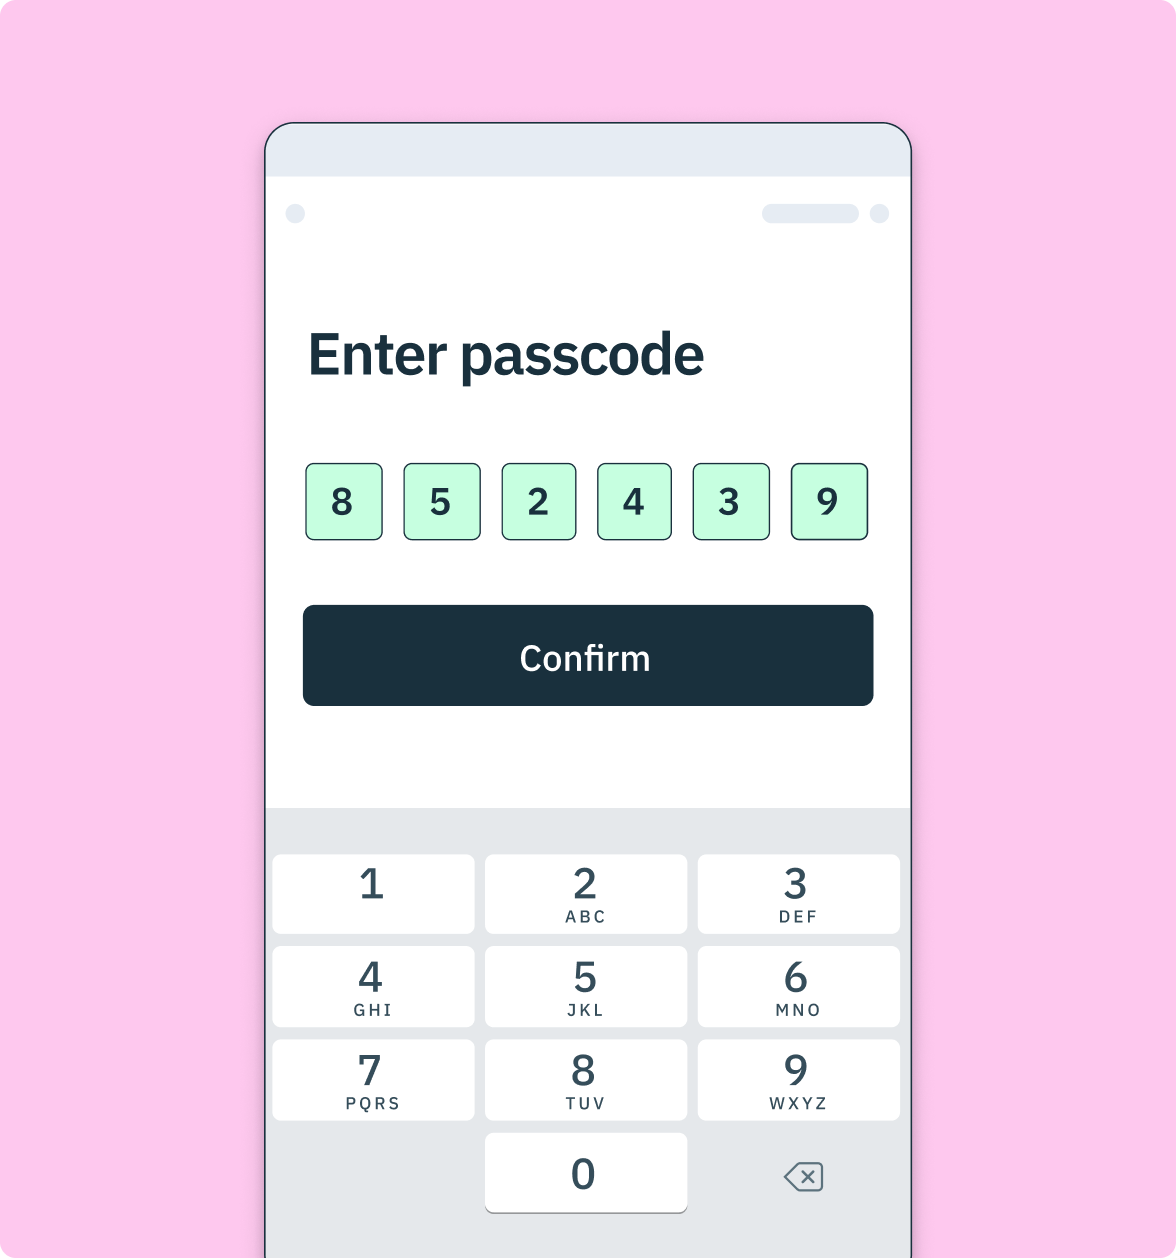 An example of a one-time passcode (OTP) authentication process